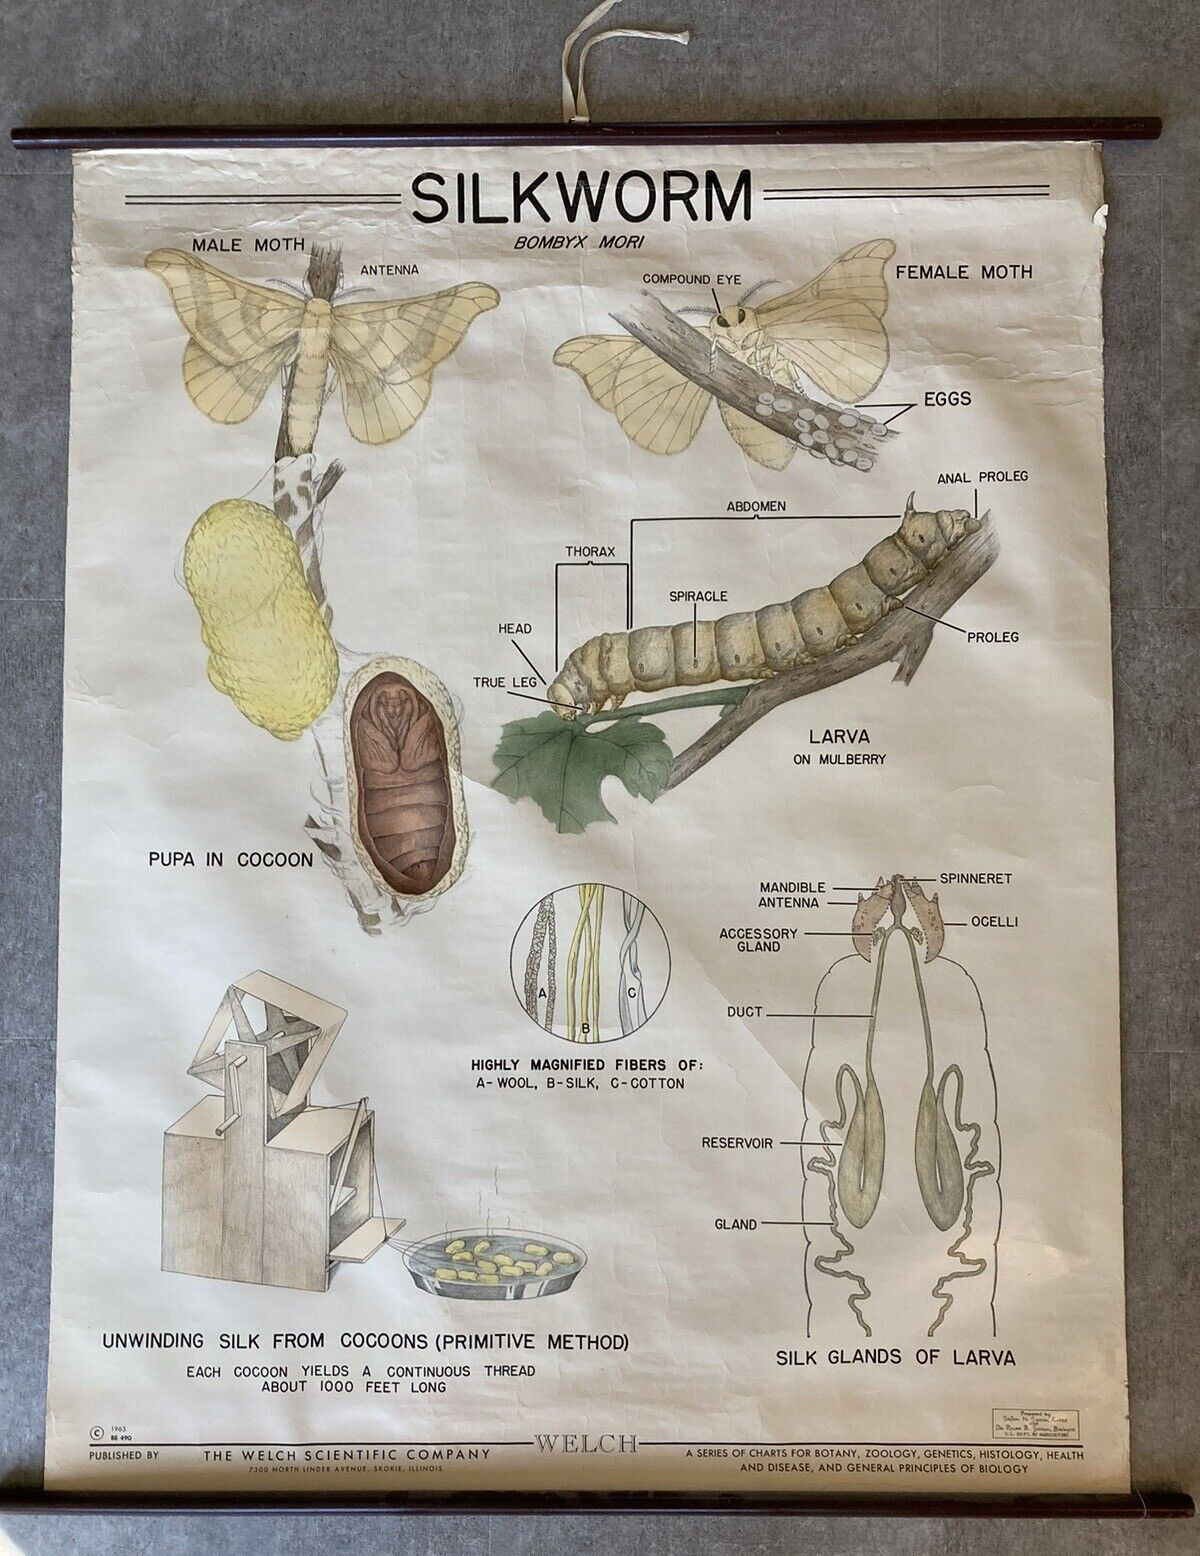 BEAUTIFUL Vintage Silkworm Chart by the Welch Scientific Company